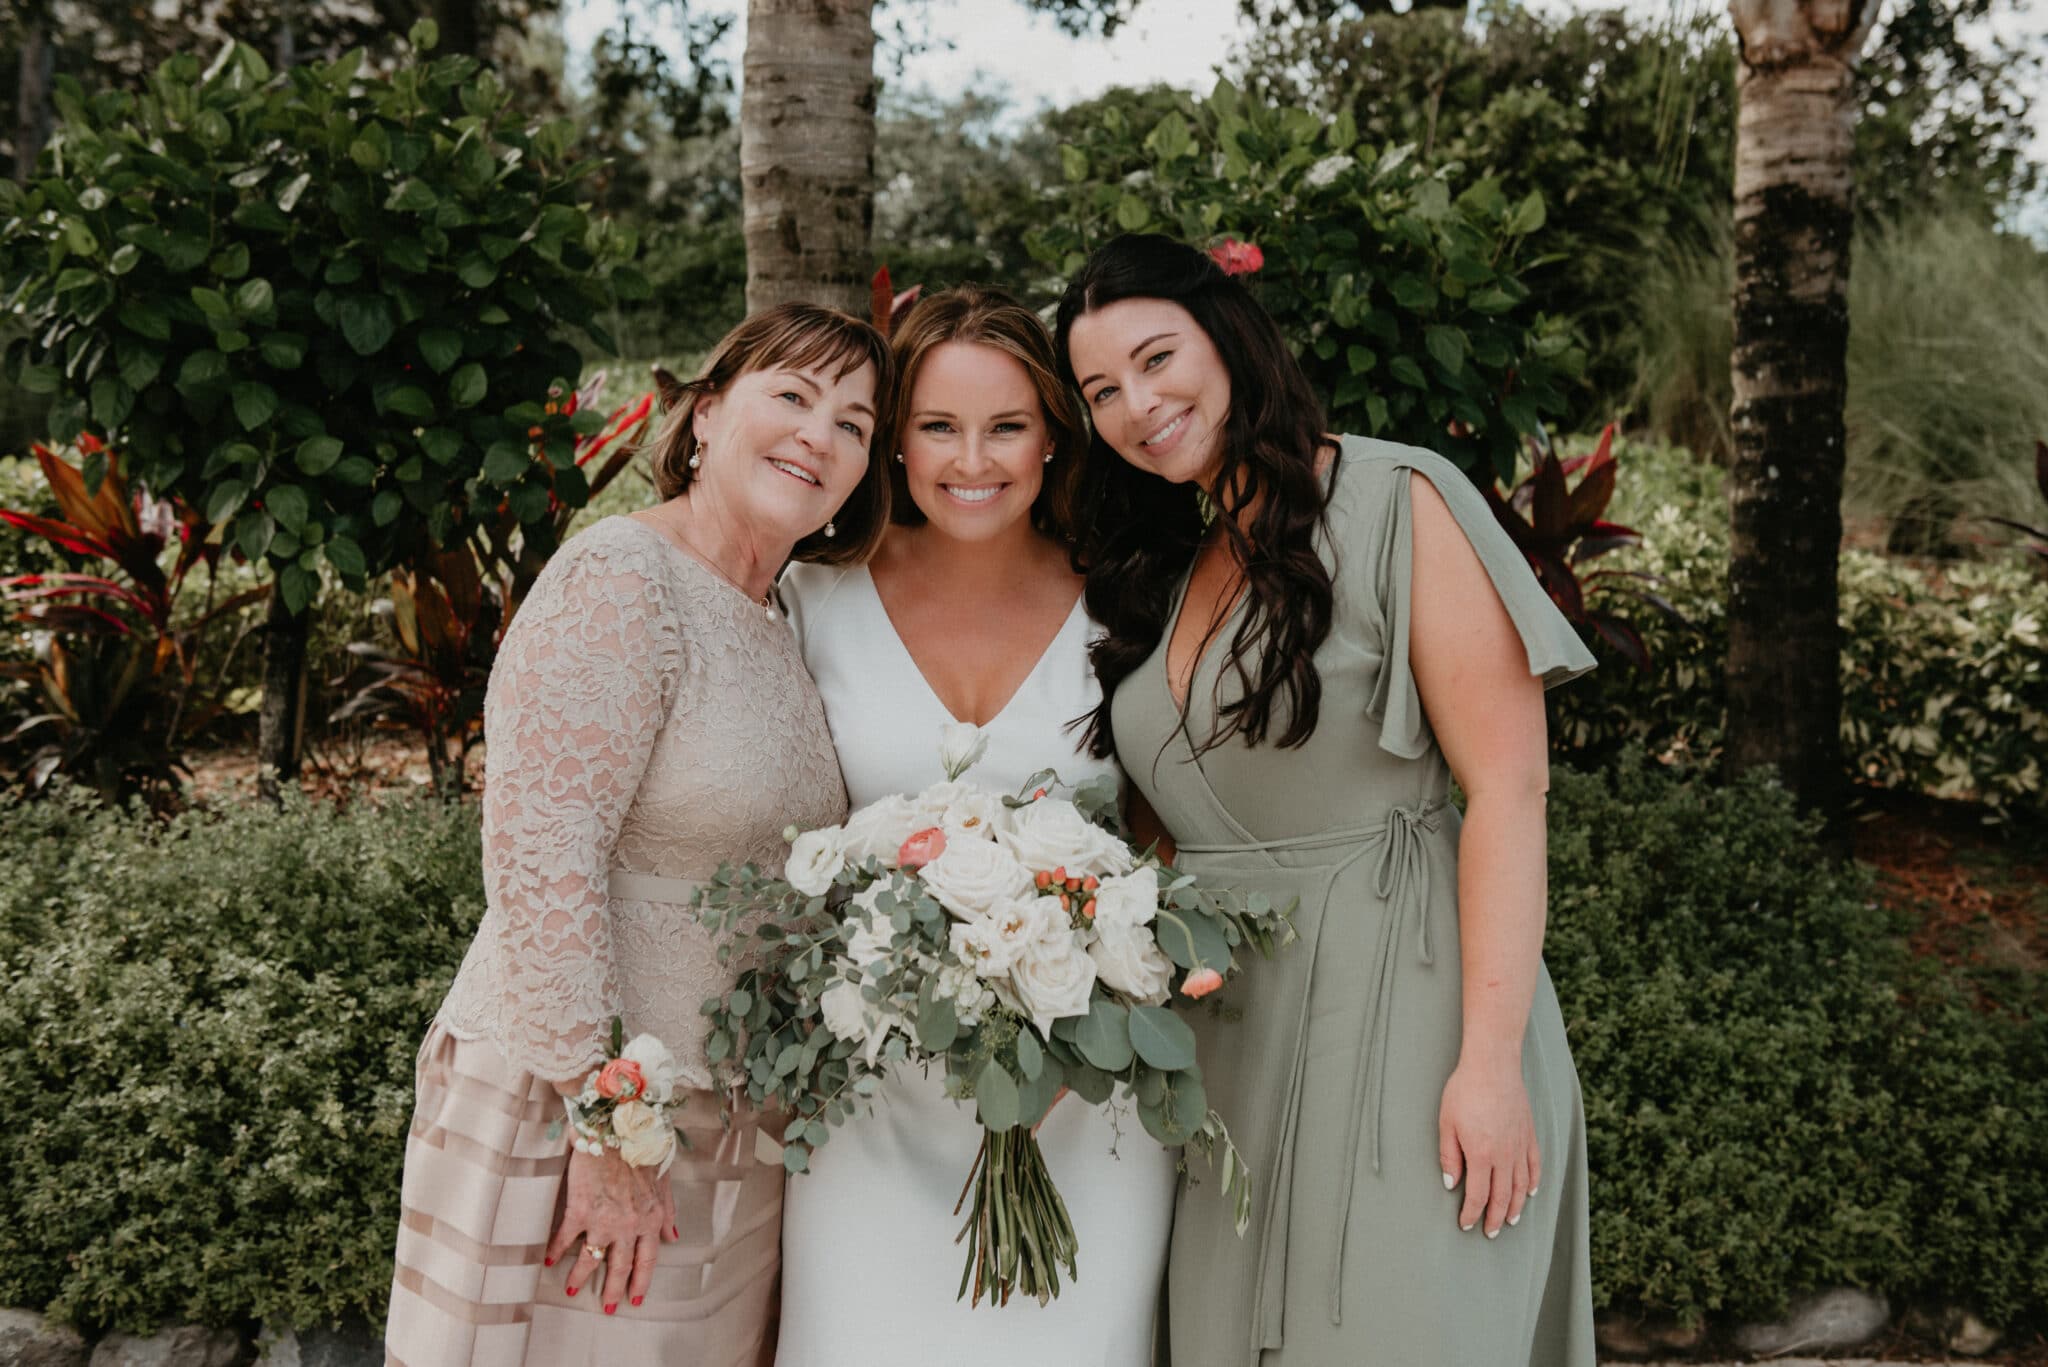 Bride posing with her mother and bridesmaid